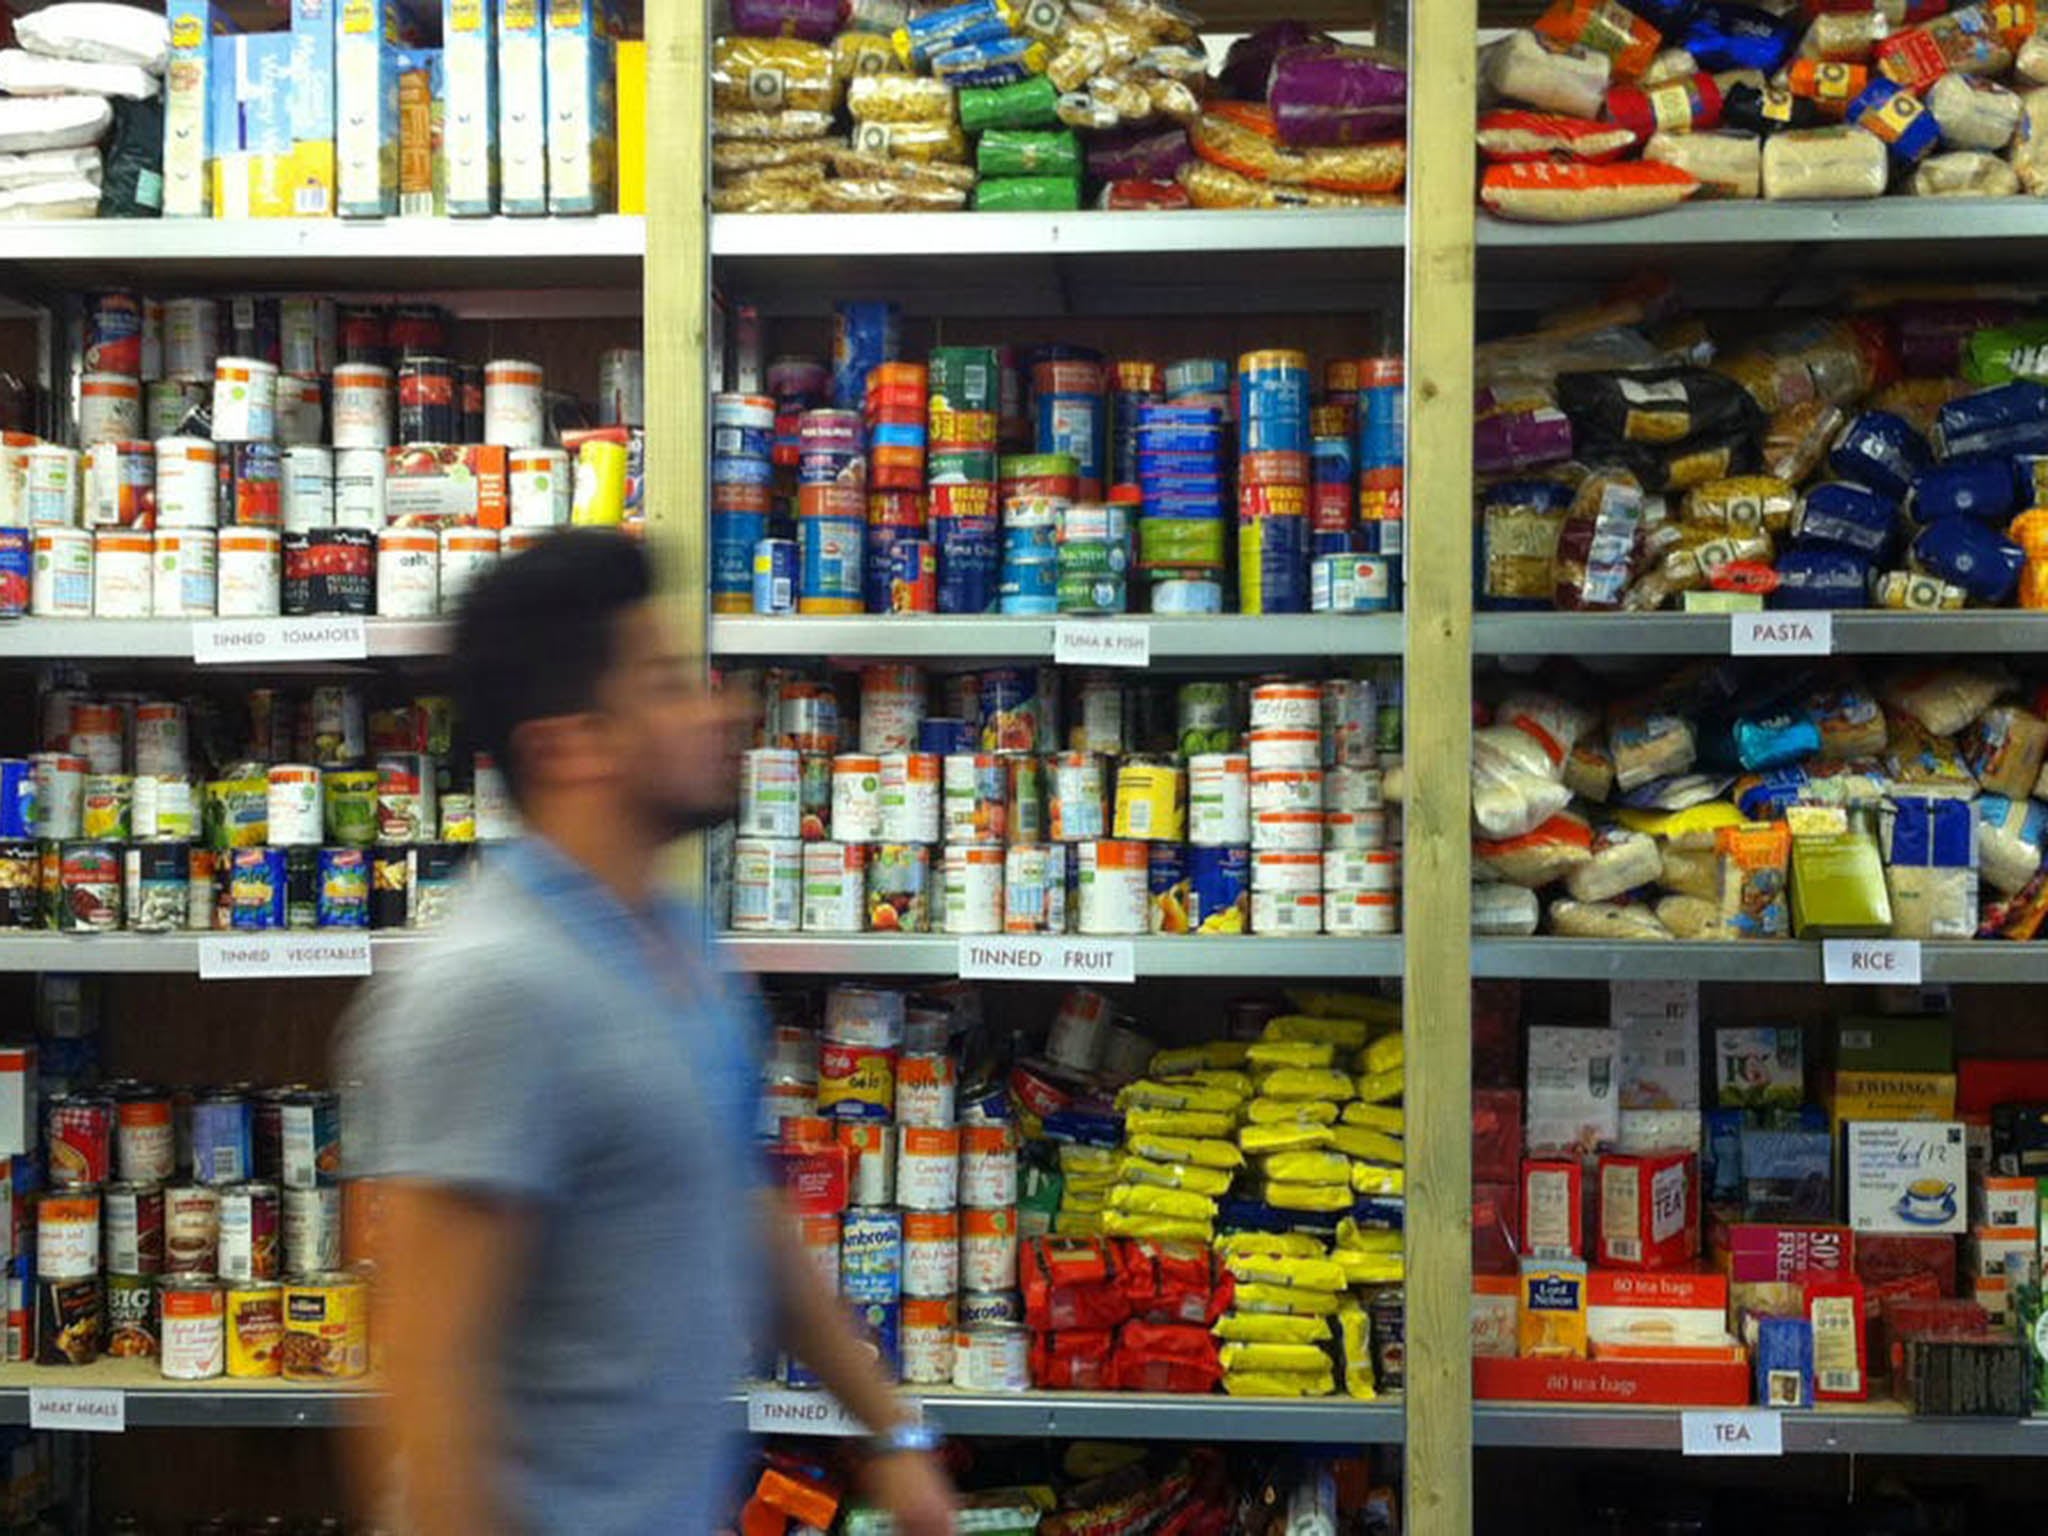 Low income is the biggest single – and fastest growing – reason for referral to food banks, accounting for 28 per cent of referrals compared to 26 per cent in the previous year